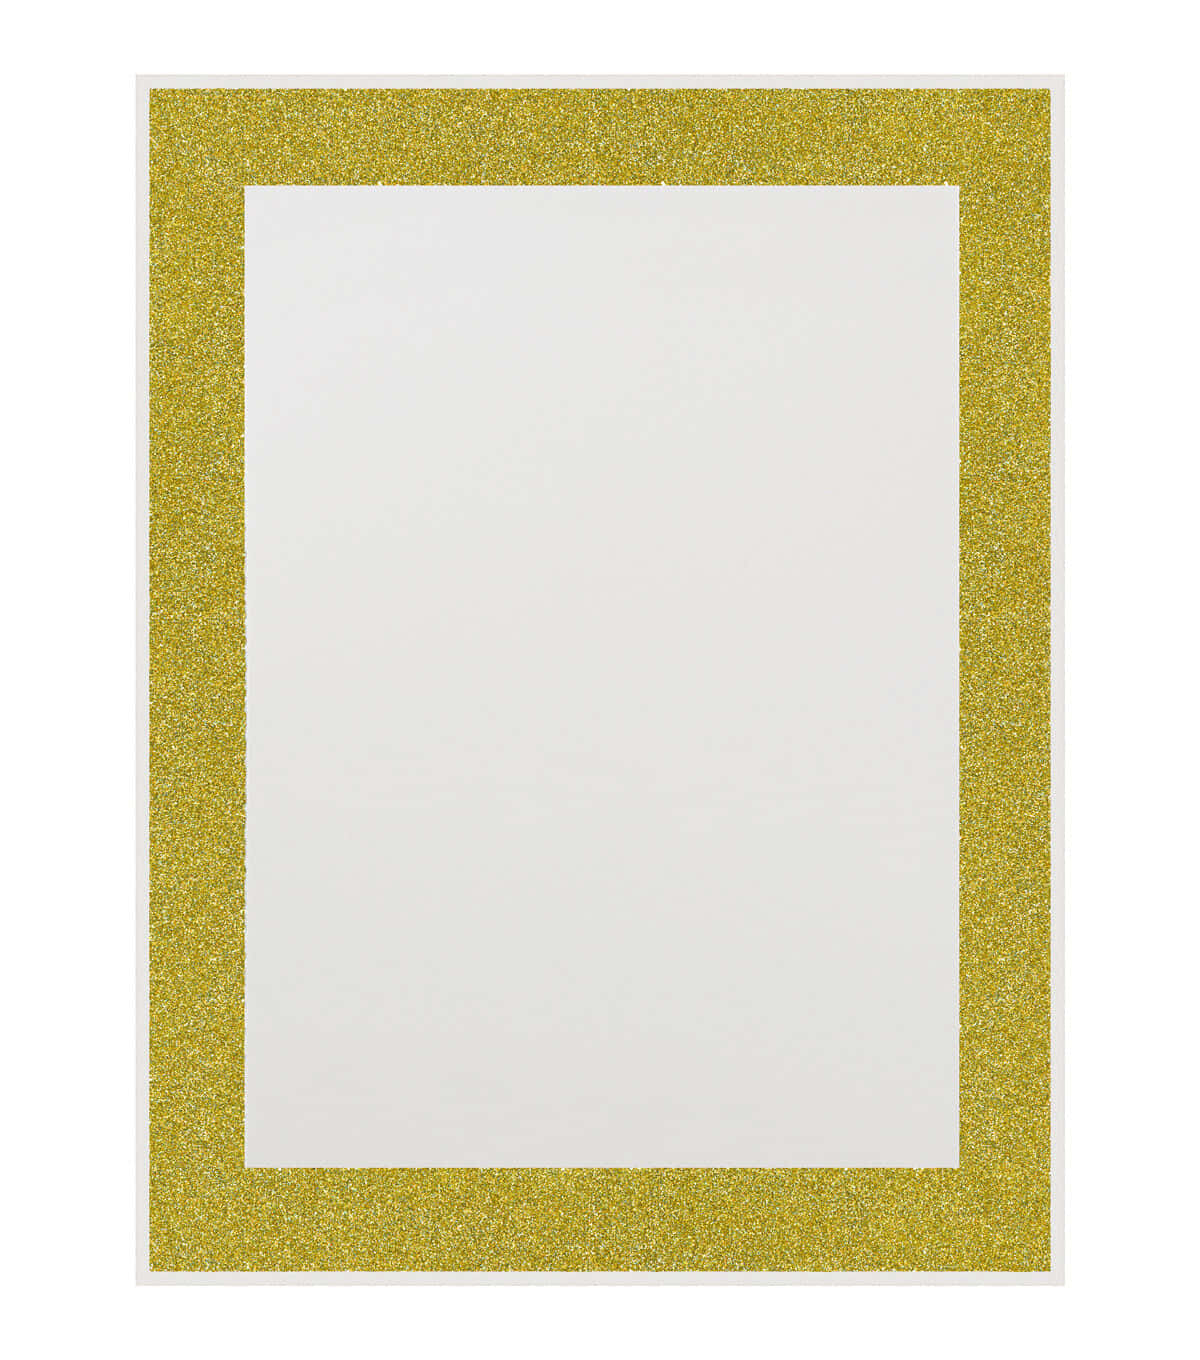 A Yellow Frame With A White Border